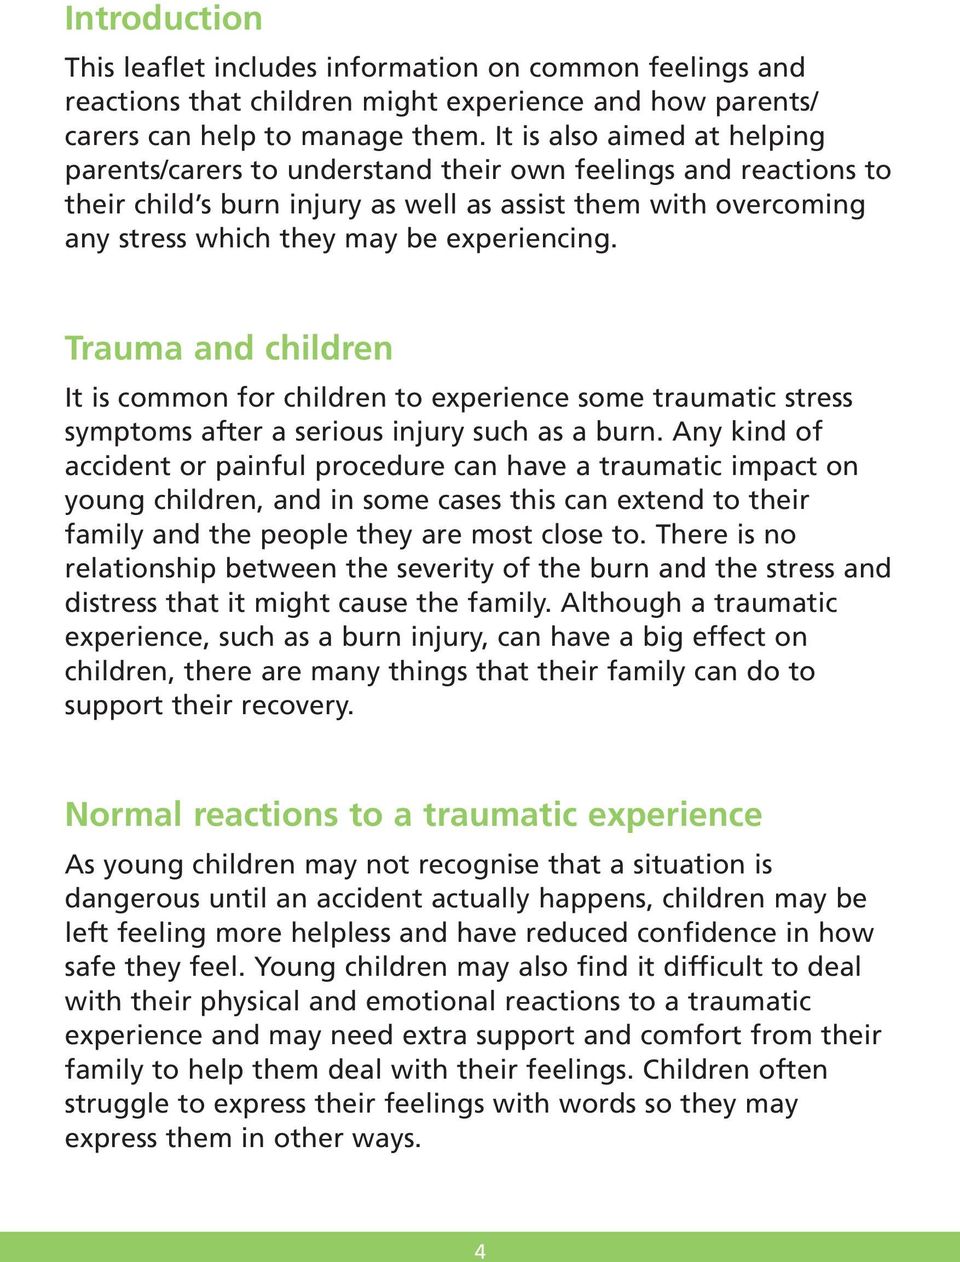 Trauma and children It is common for children to experience some traumatic stress symptoms after a serious injury such as a burn.